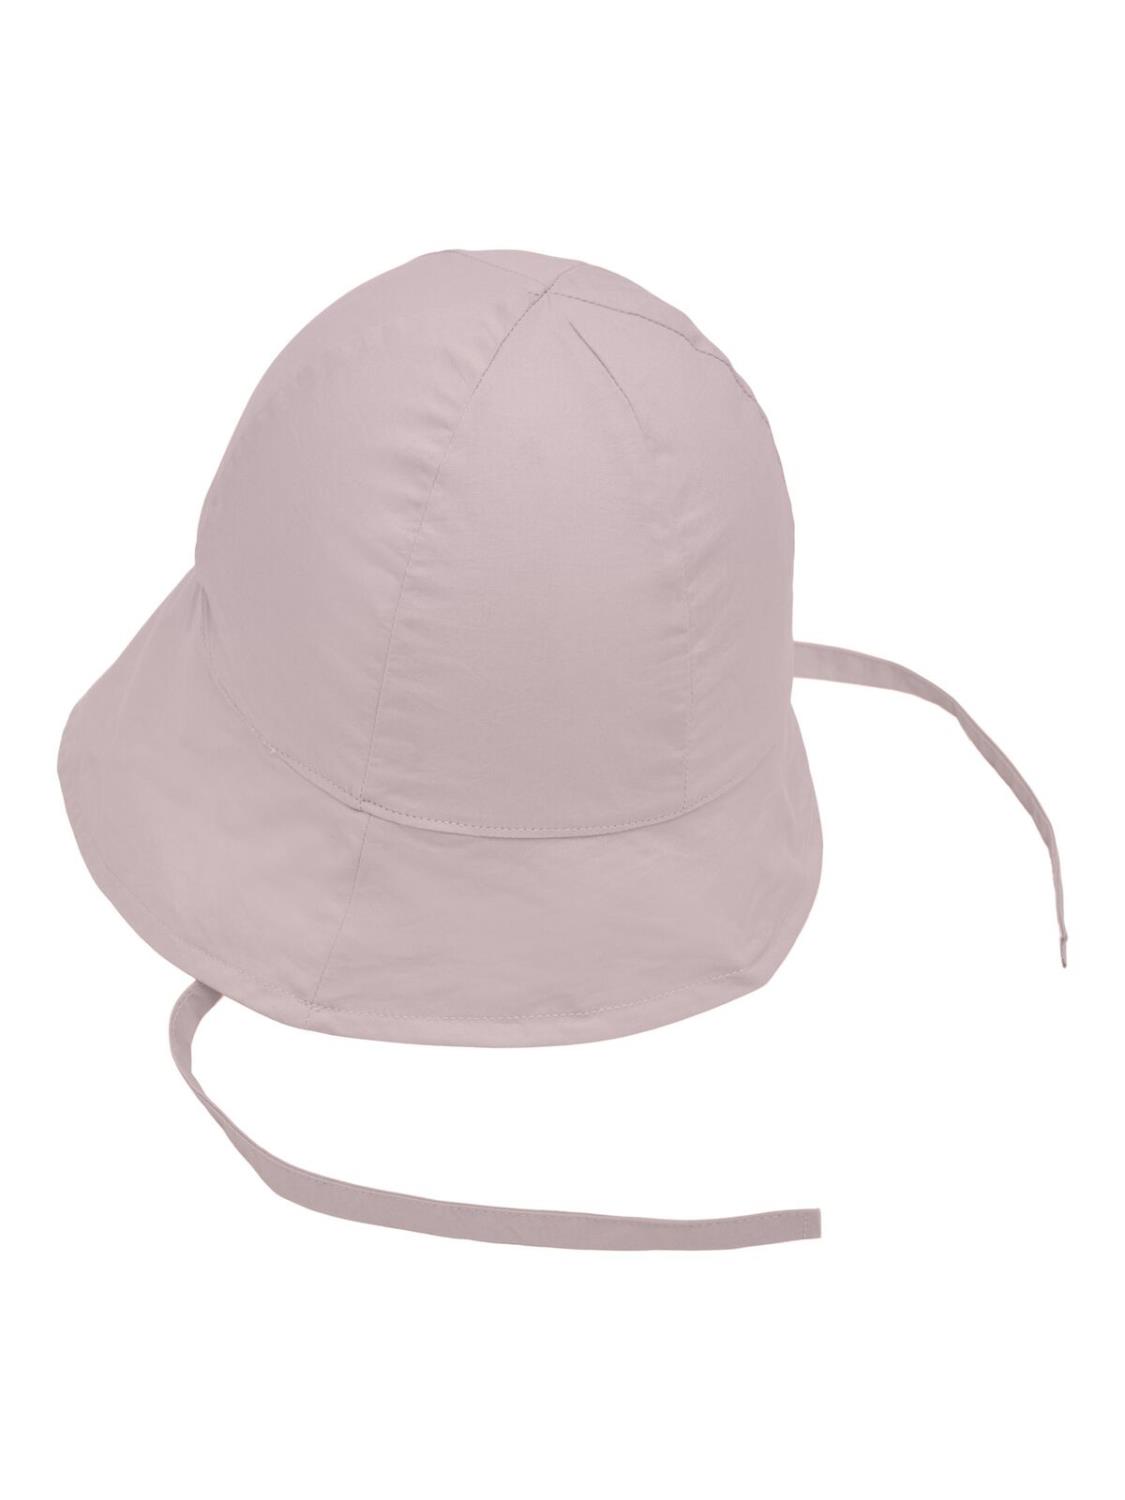 Zille UV Hat w/Earflaps - Violet Ice